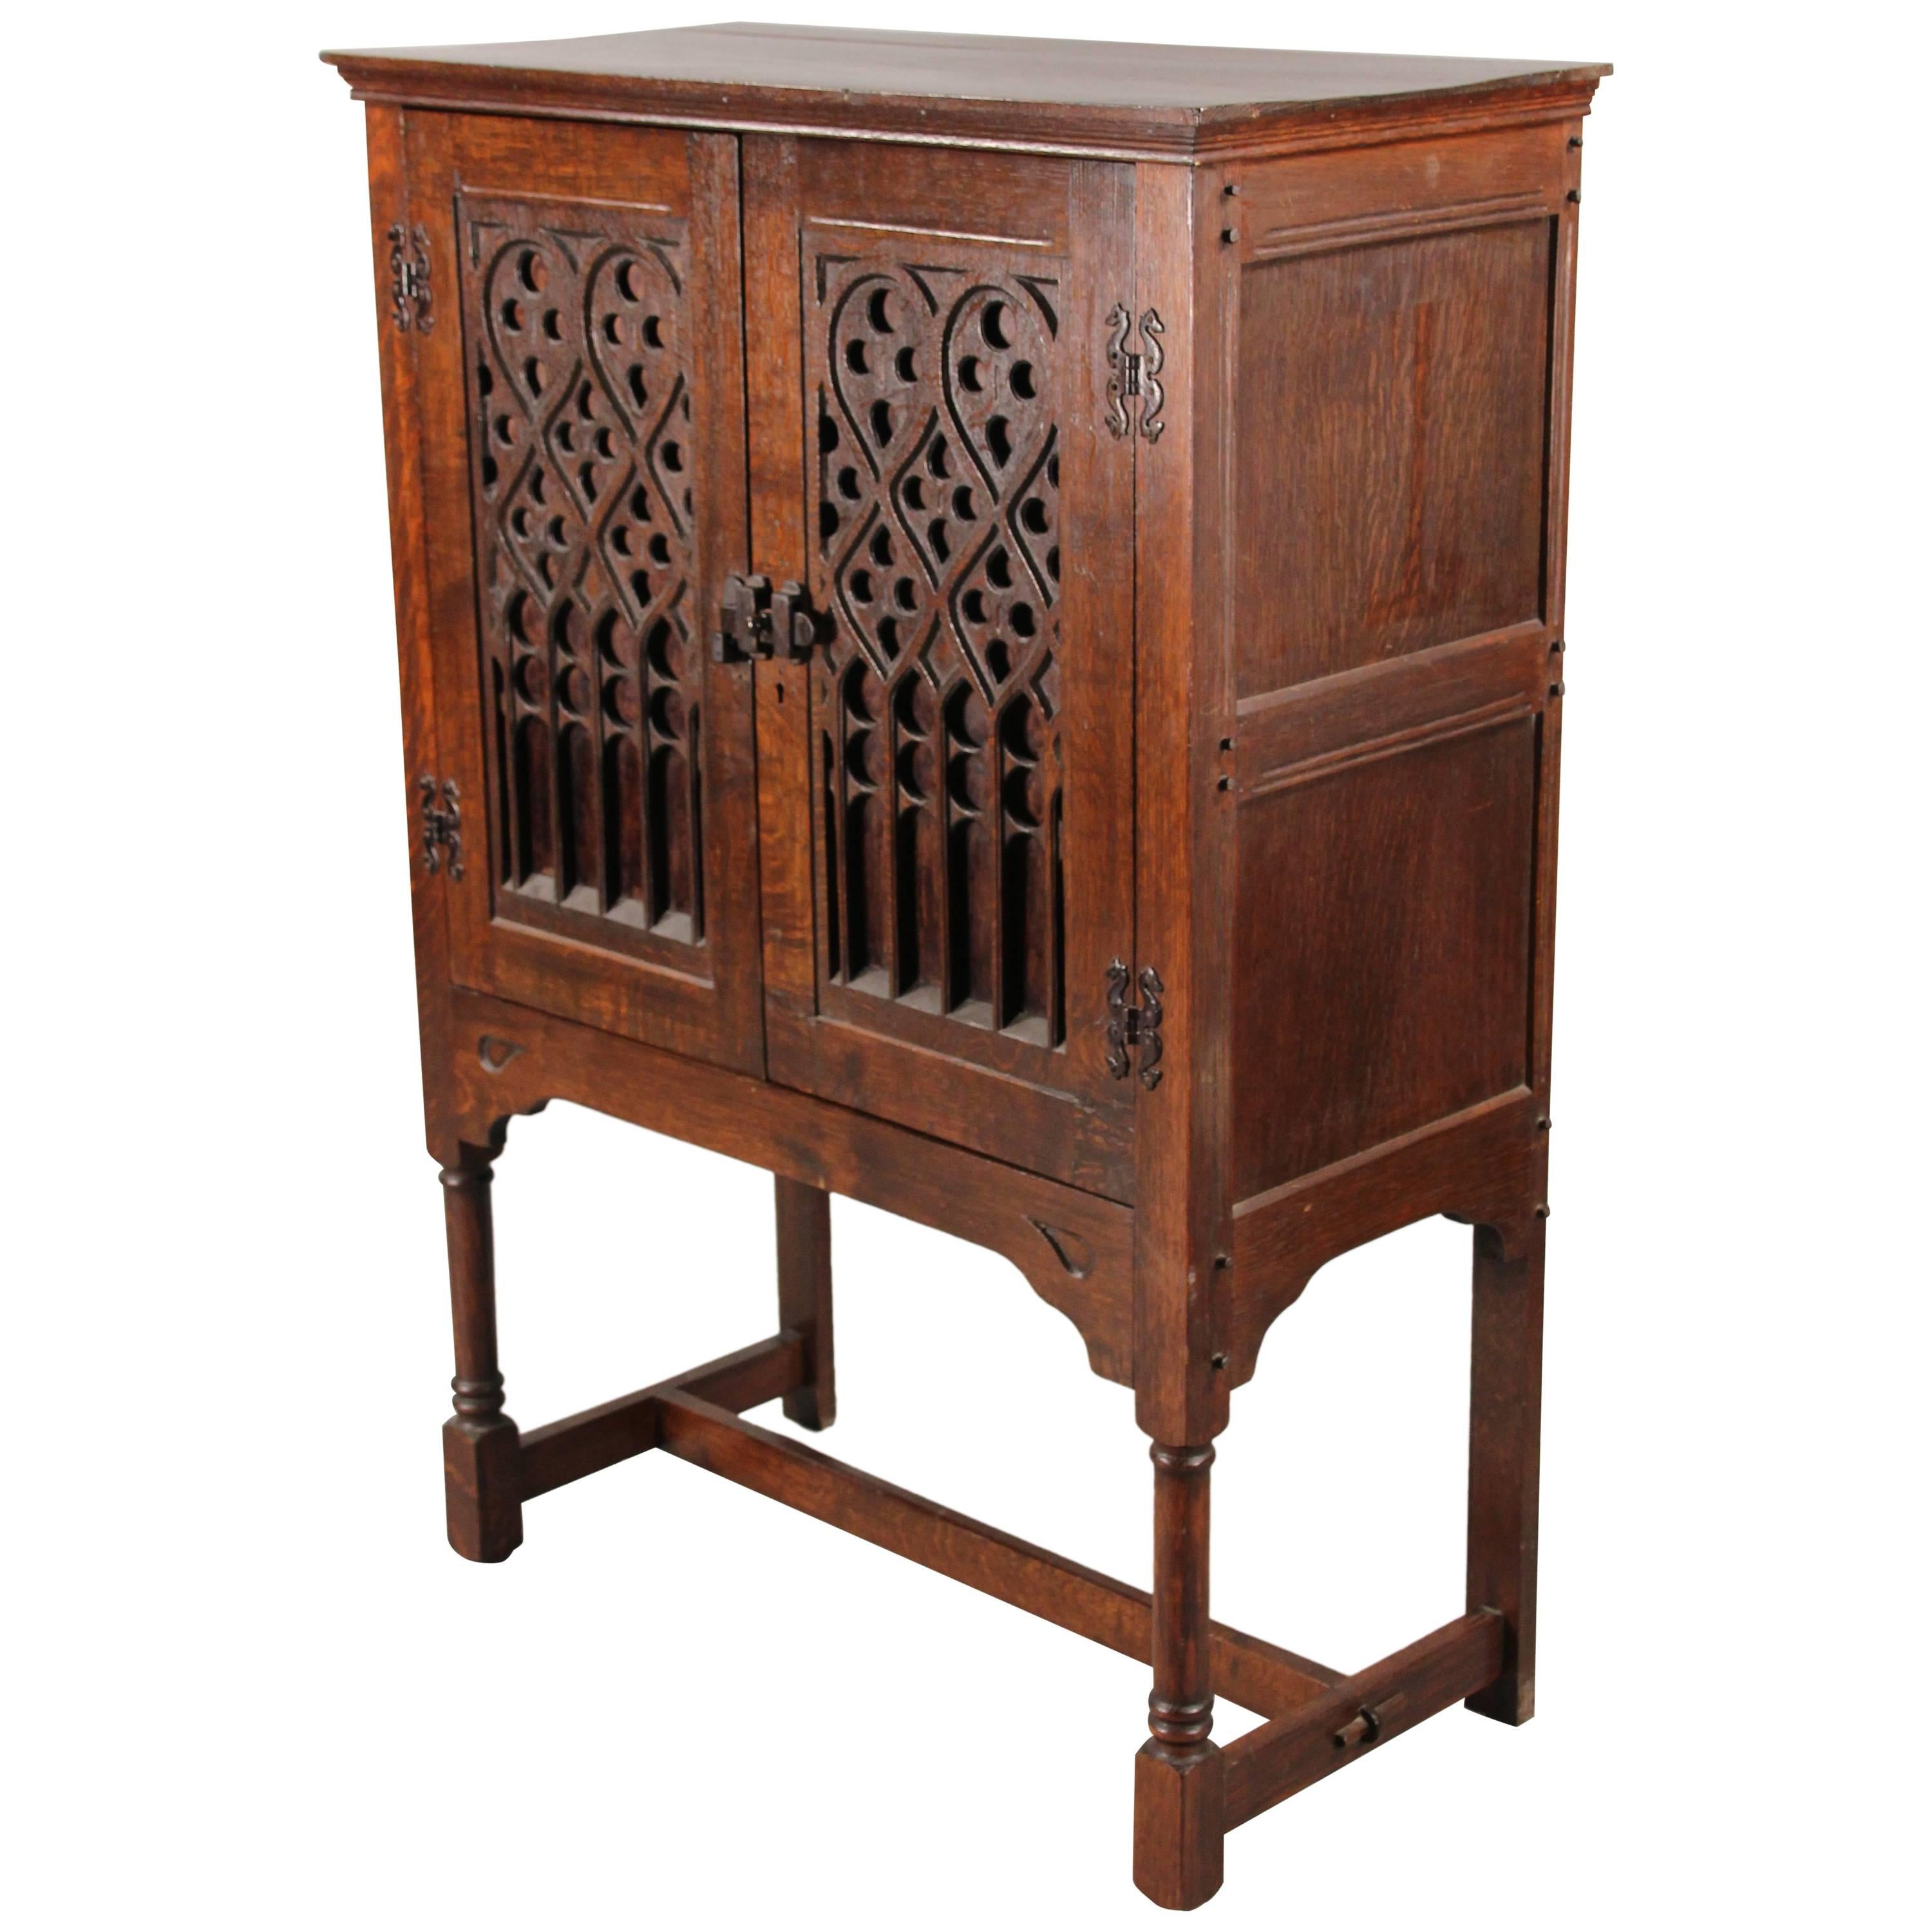 Turn of the Century Spanish Revival Cabinet with Carved Front with Iron Hardware